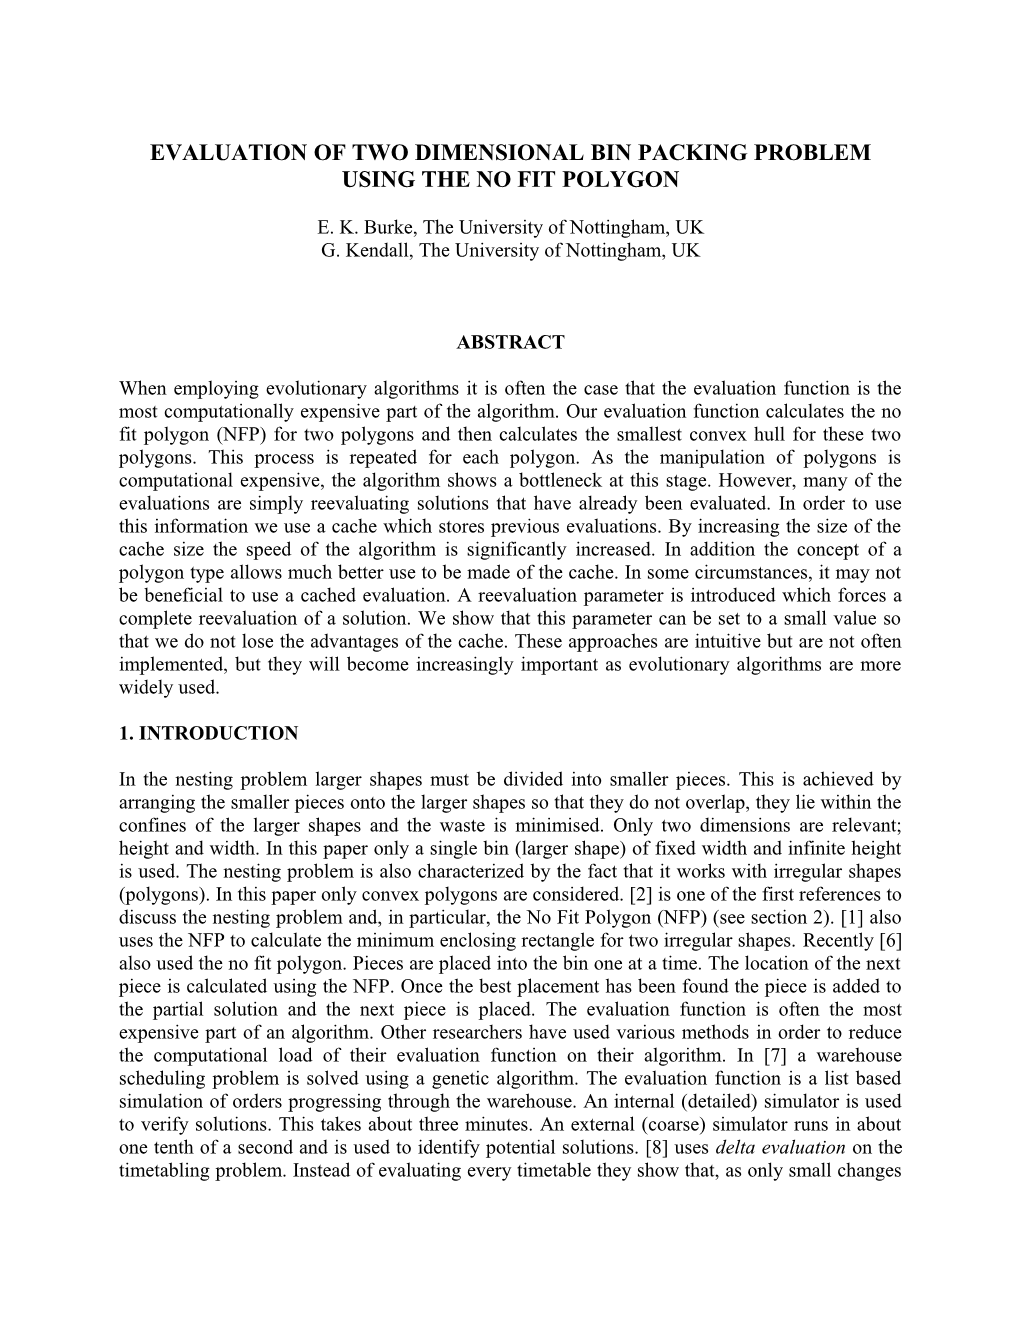 Evaluation of Two Dimensional Bin Packing Problem Using the No Fit Polygon